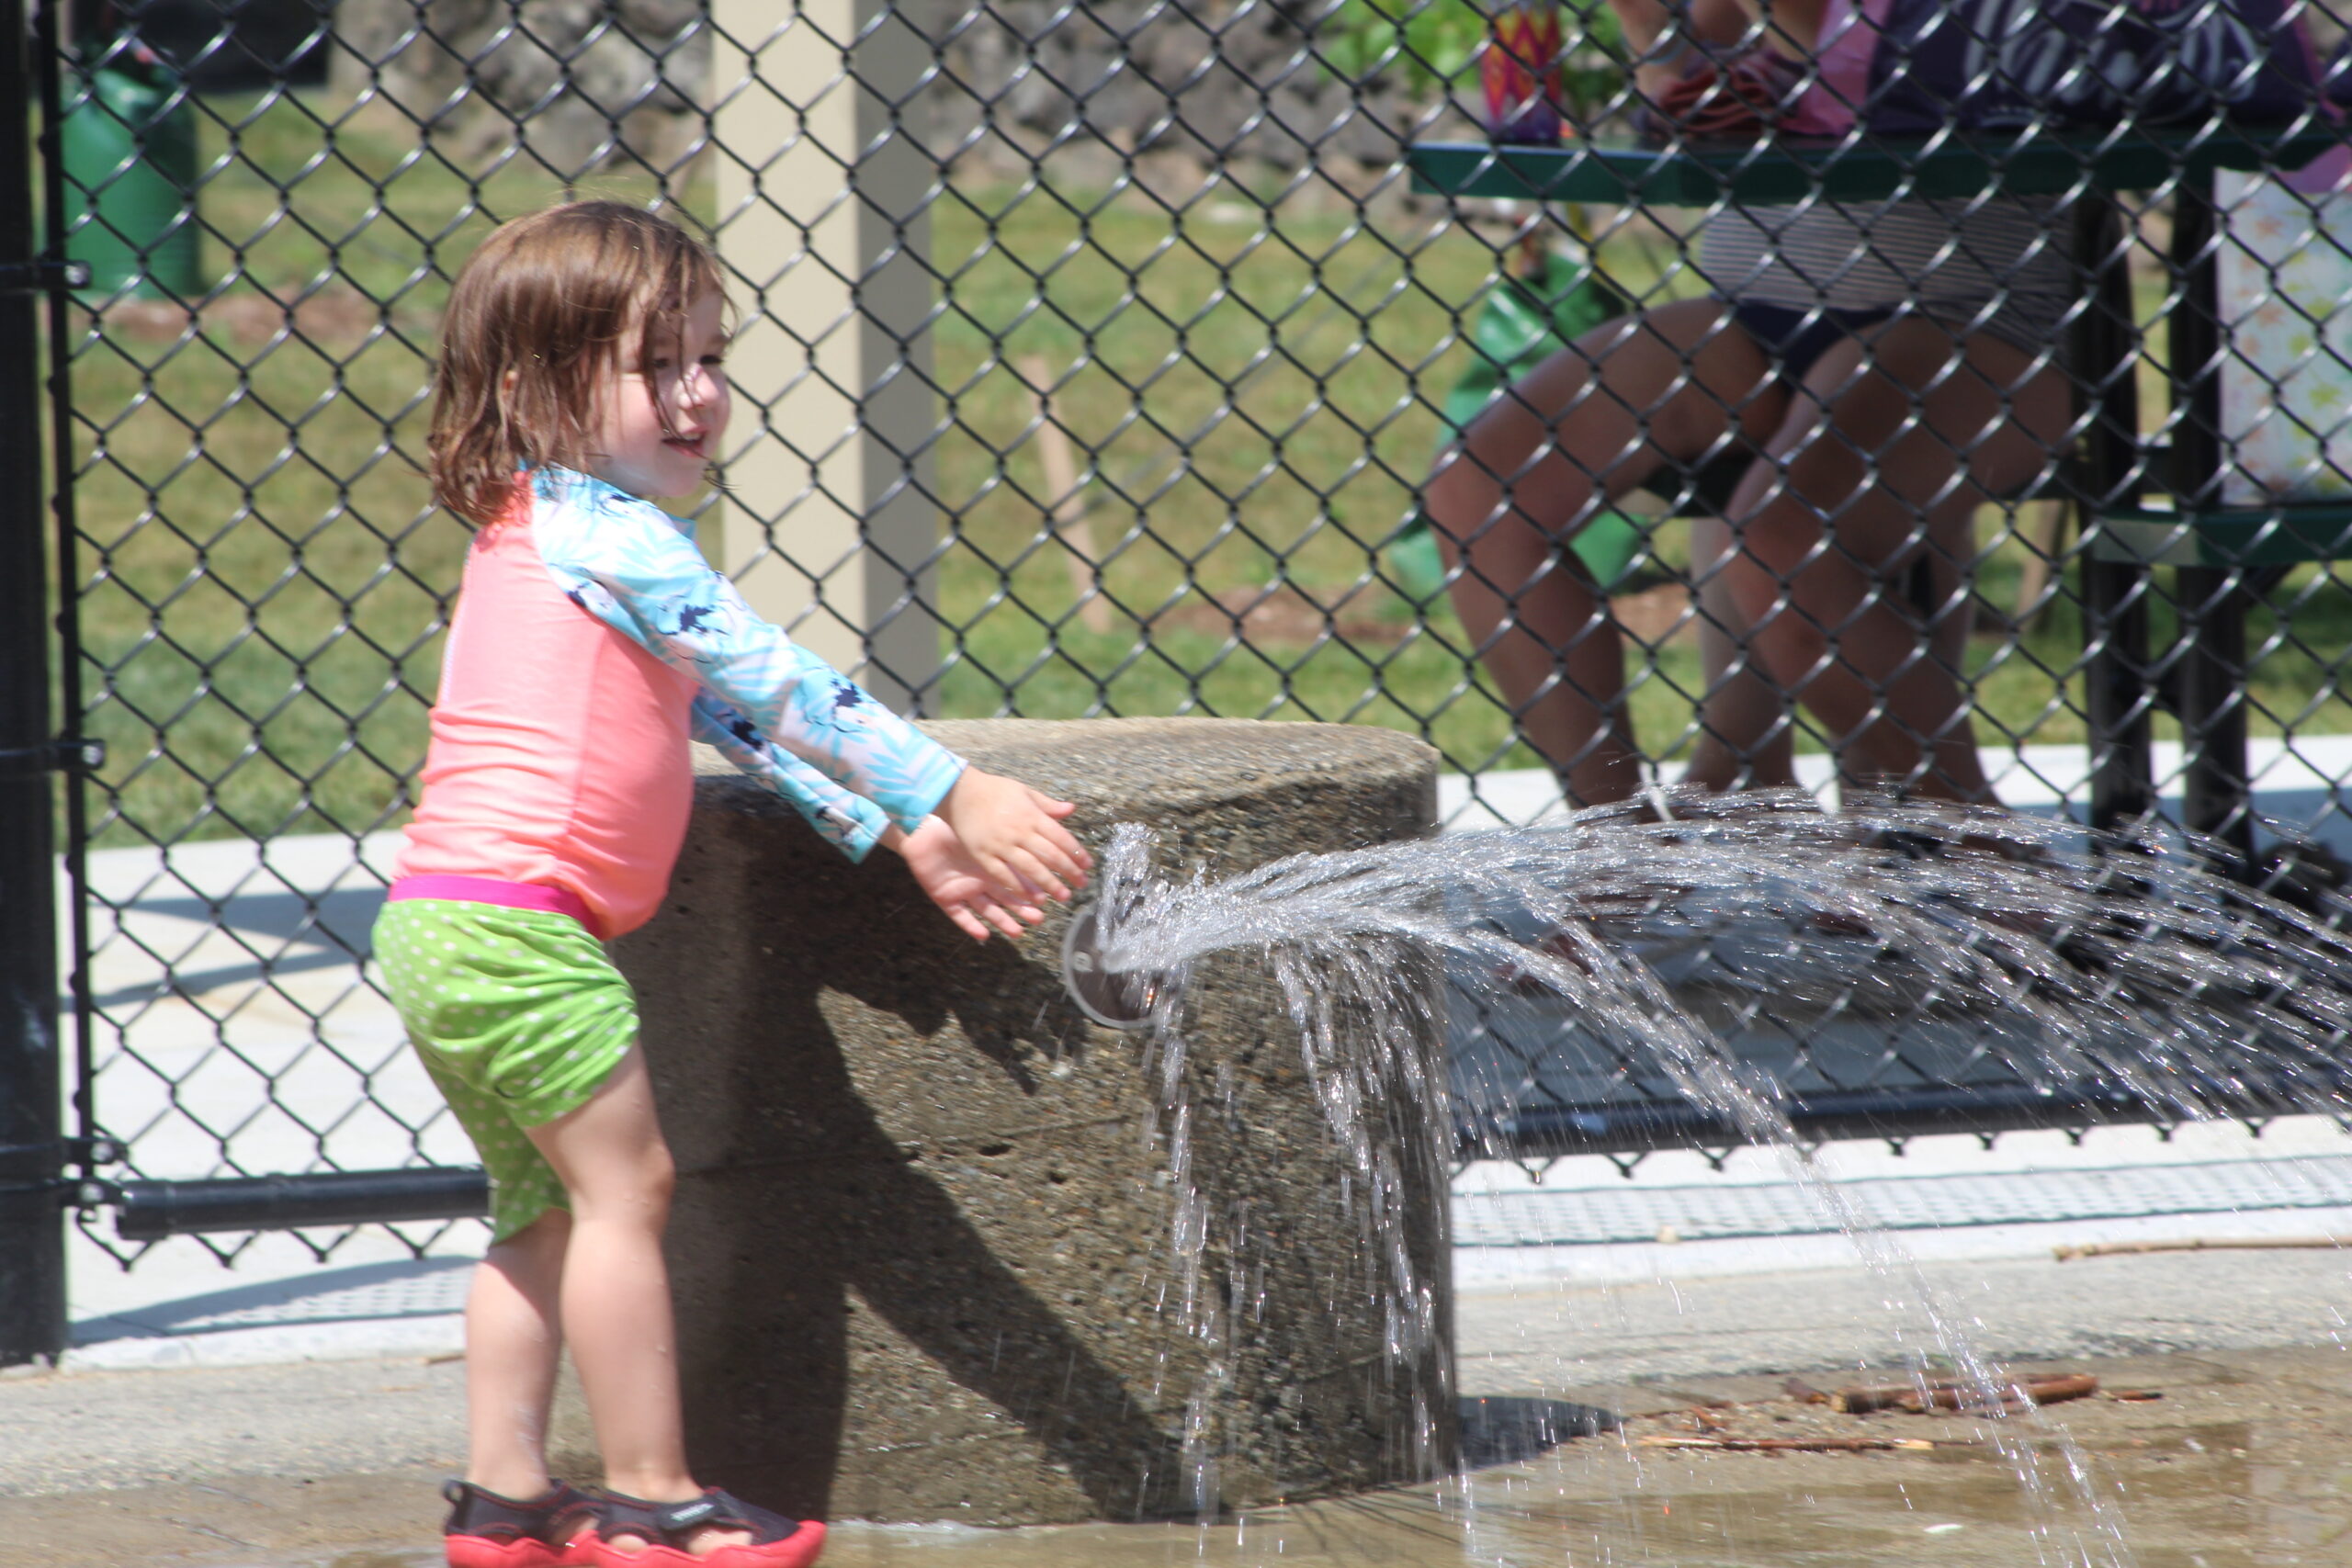 PHOTOS: Keeping cool in the summer heat